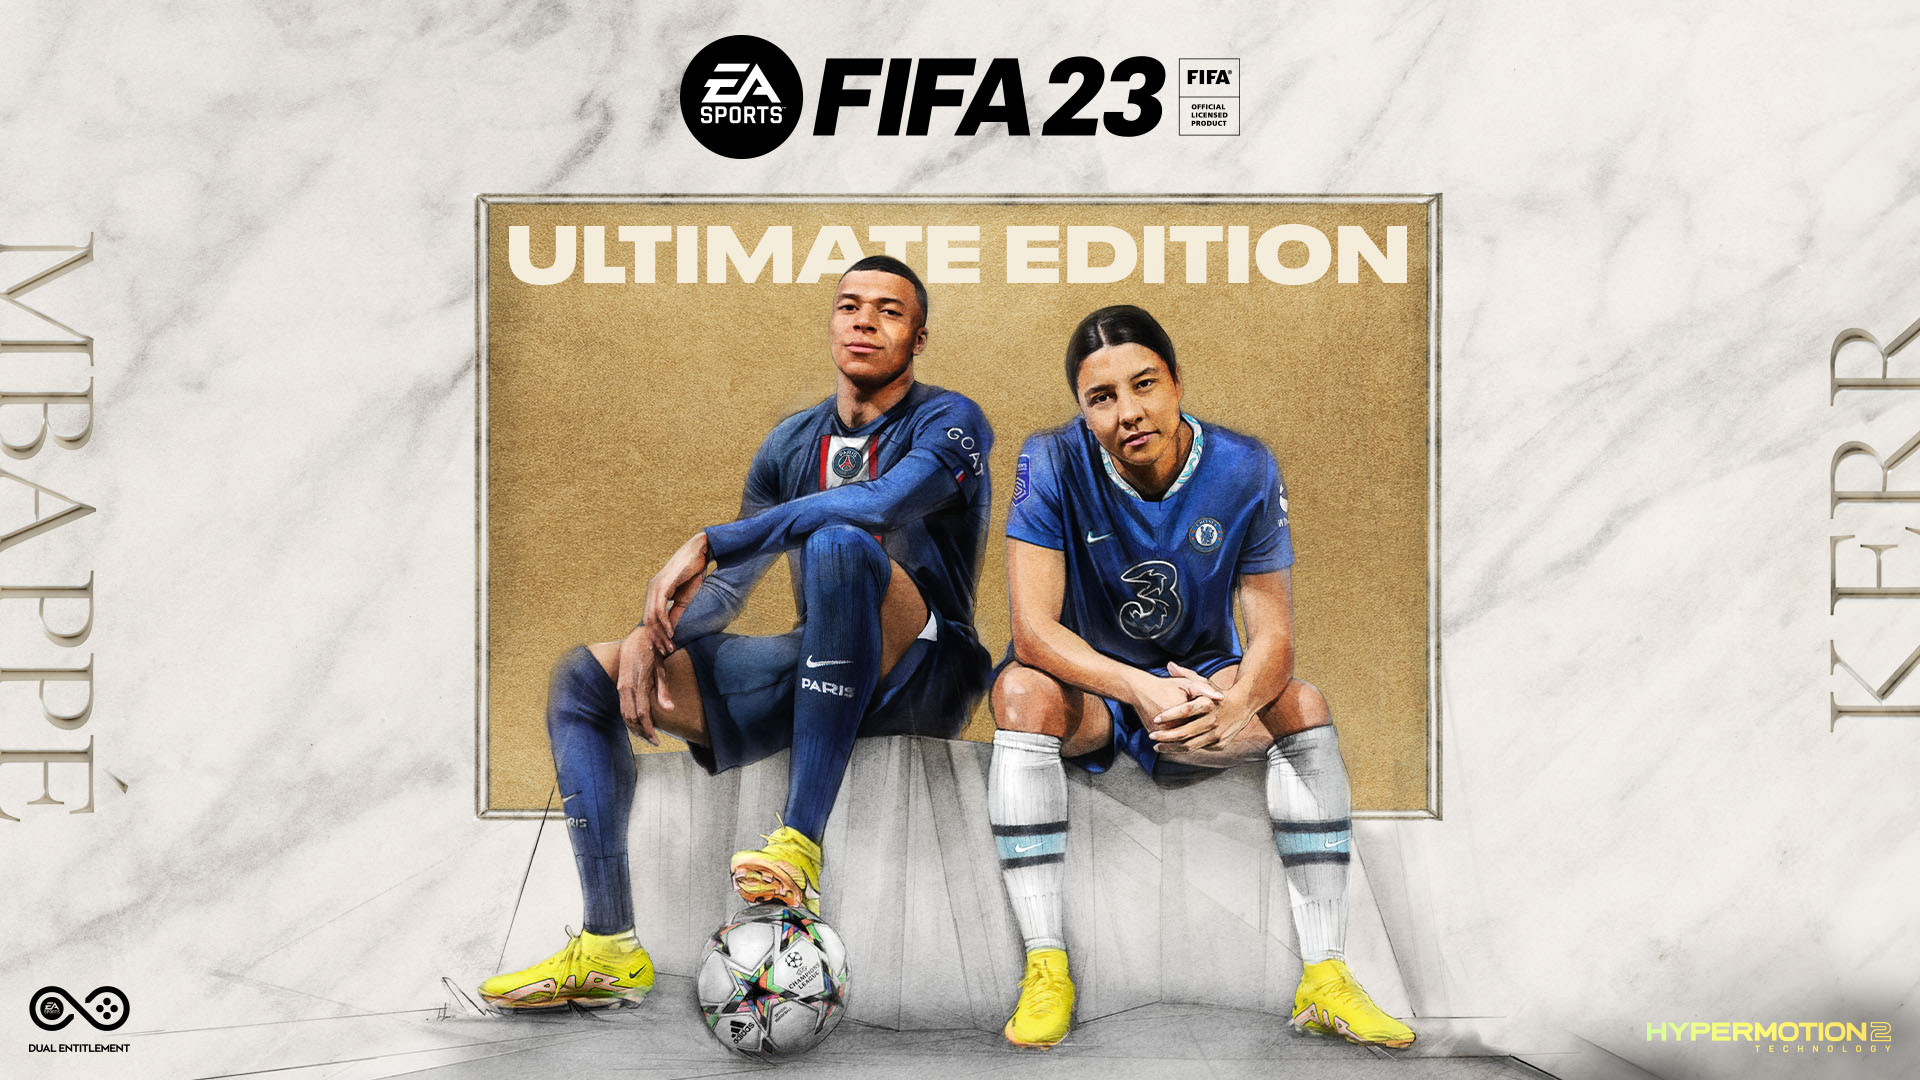 FIFA 23' has a female player on the Ultimate Edition cover for the first time